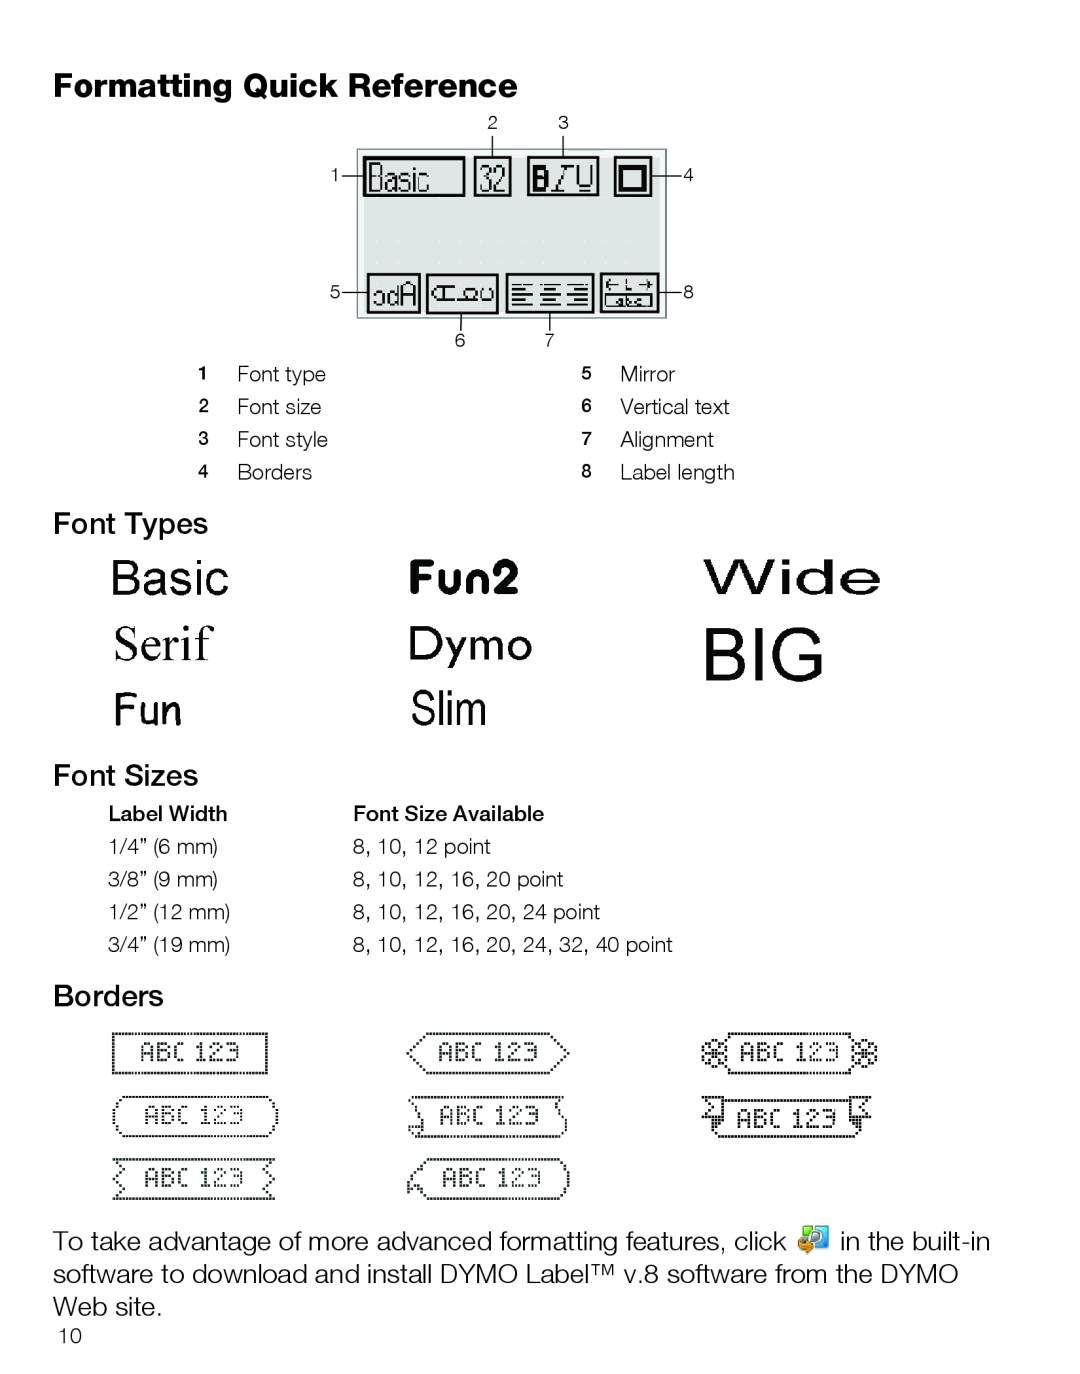 Dymo 420P quick start Formatting Quick Reference, Font Types Font Sizes, Borders 